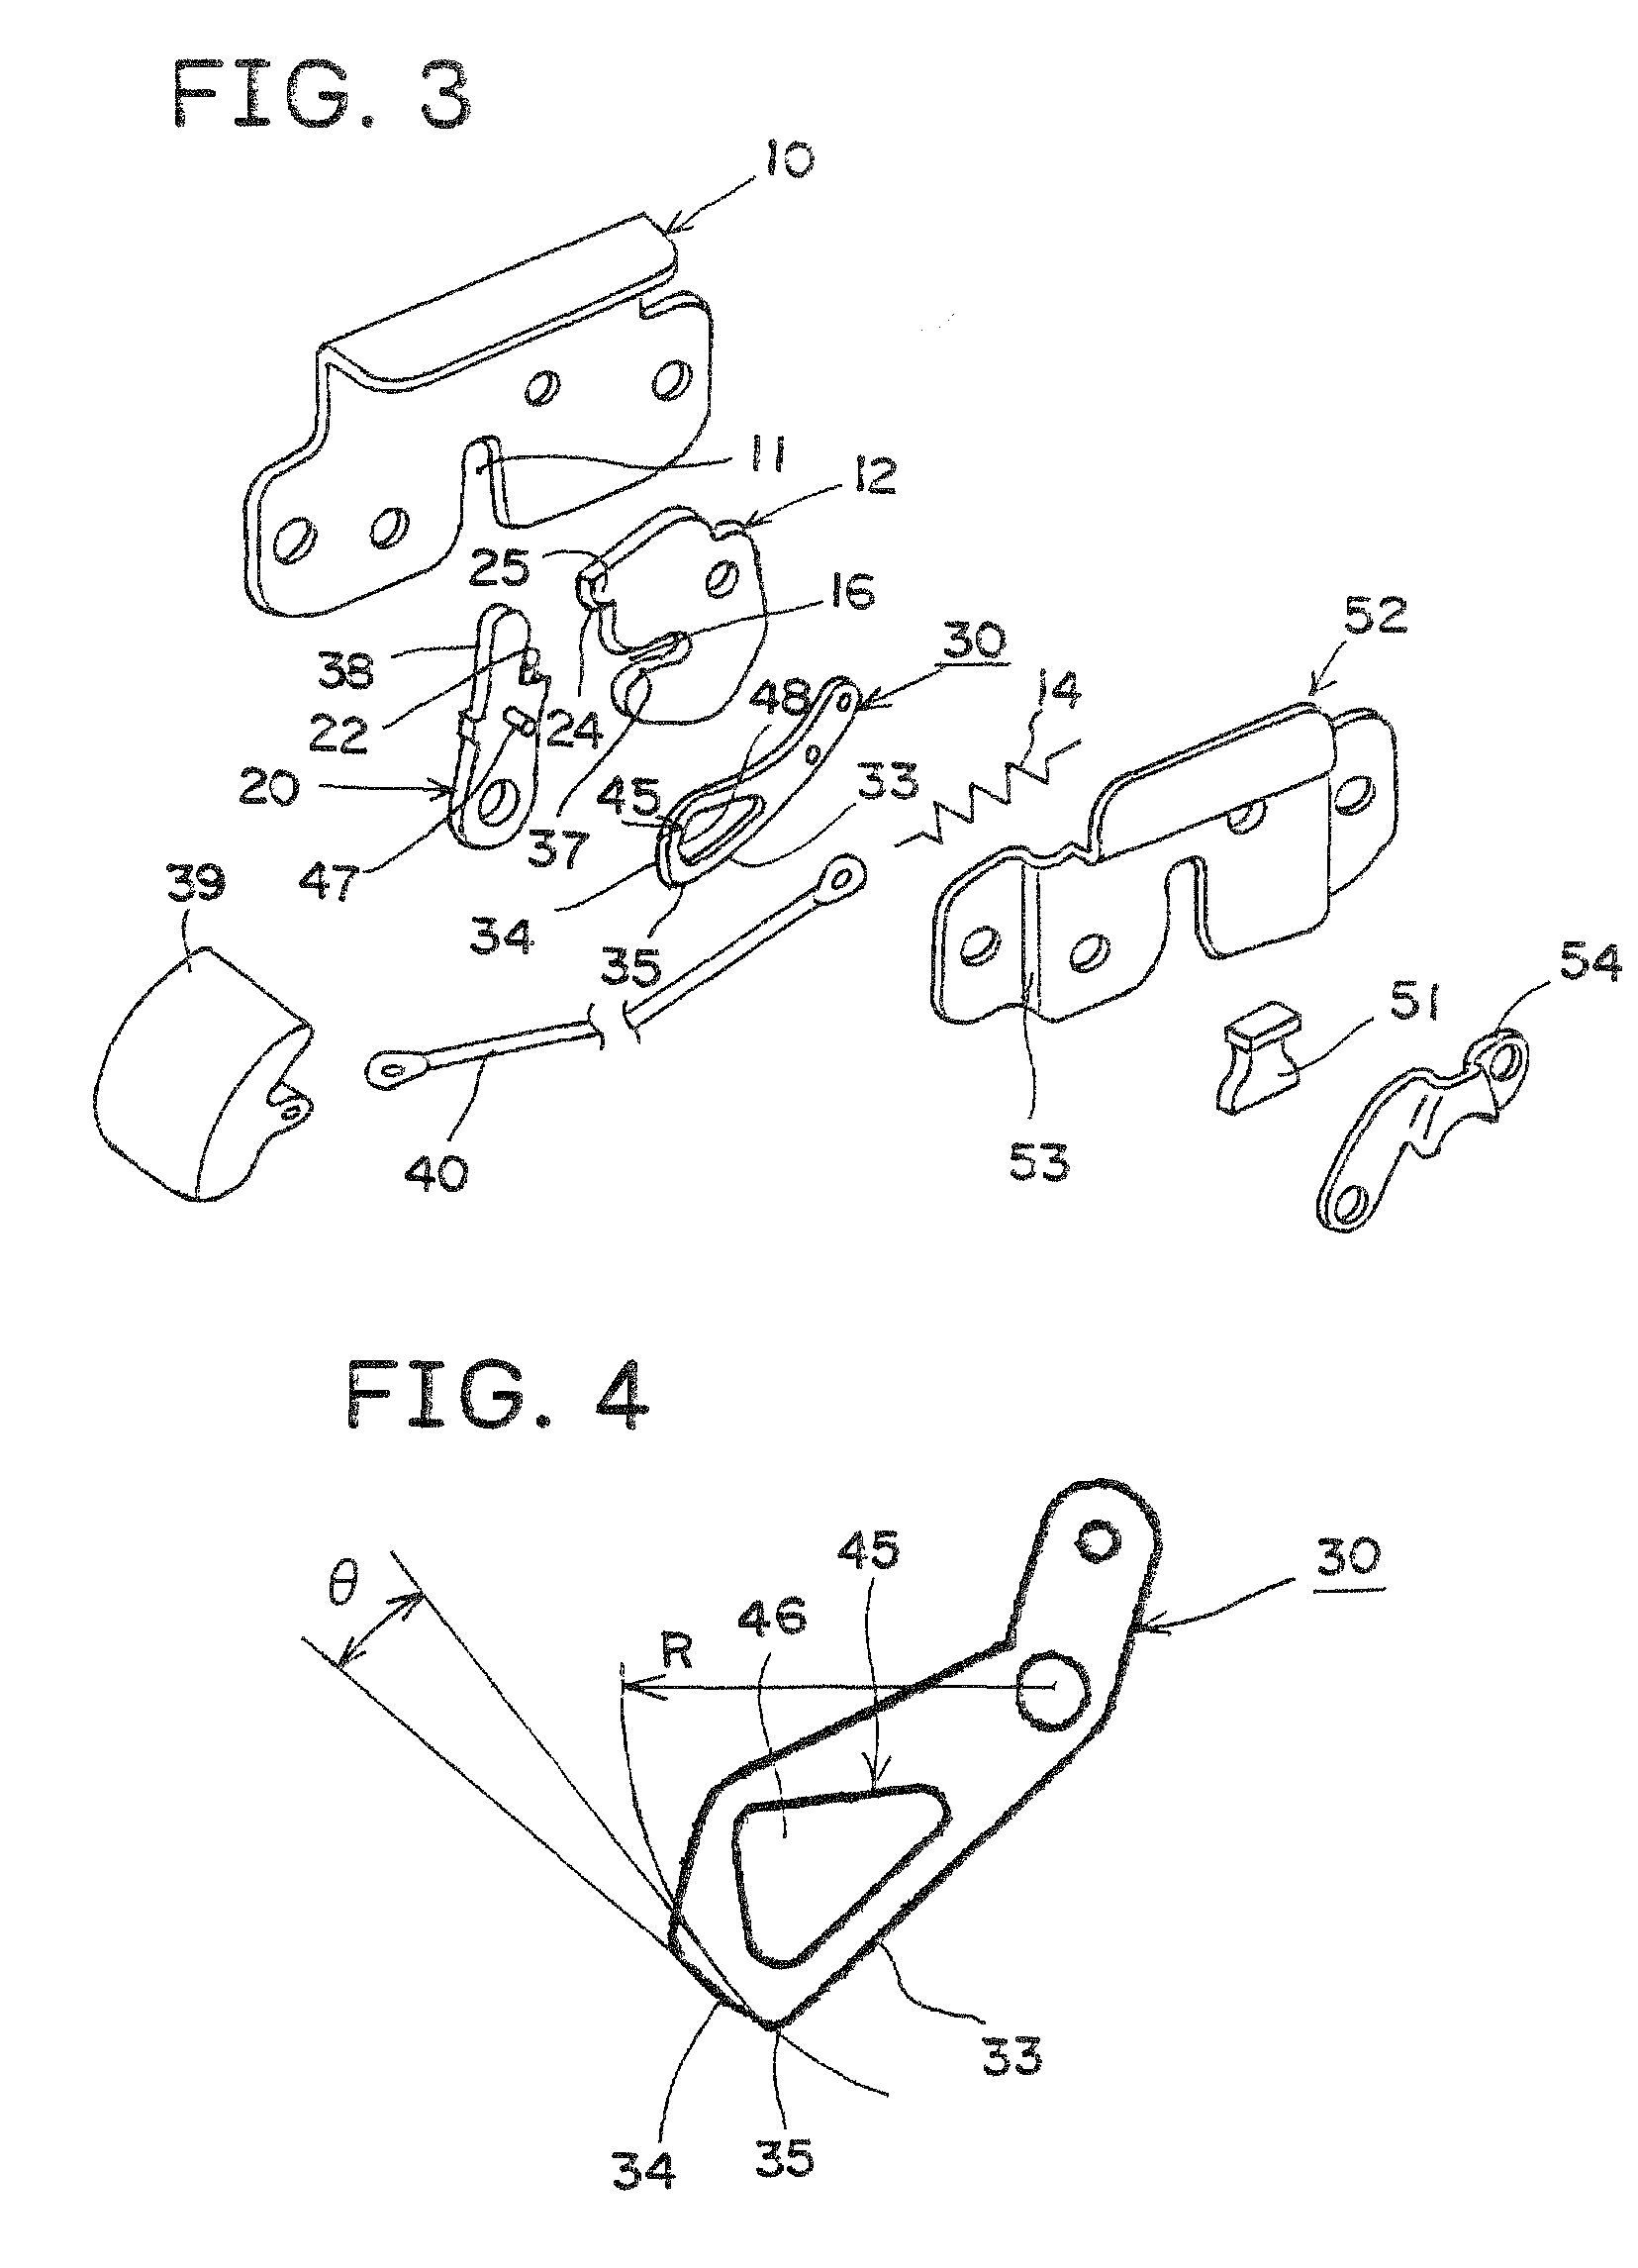 Latch device for vehicle seat